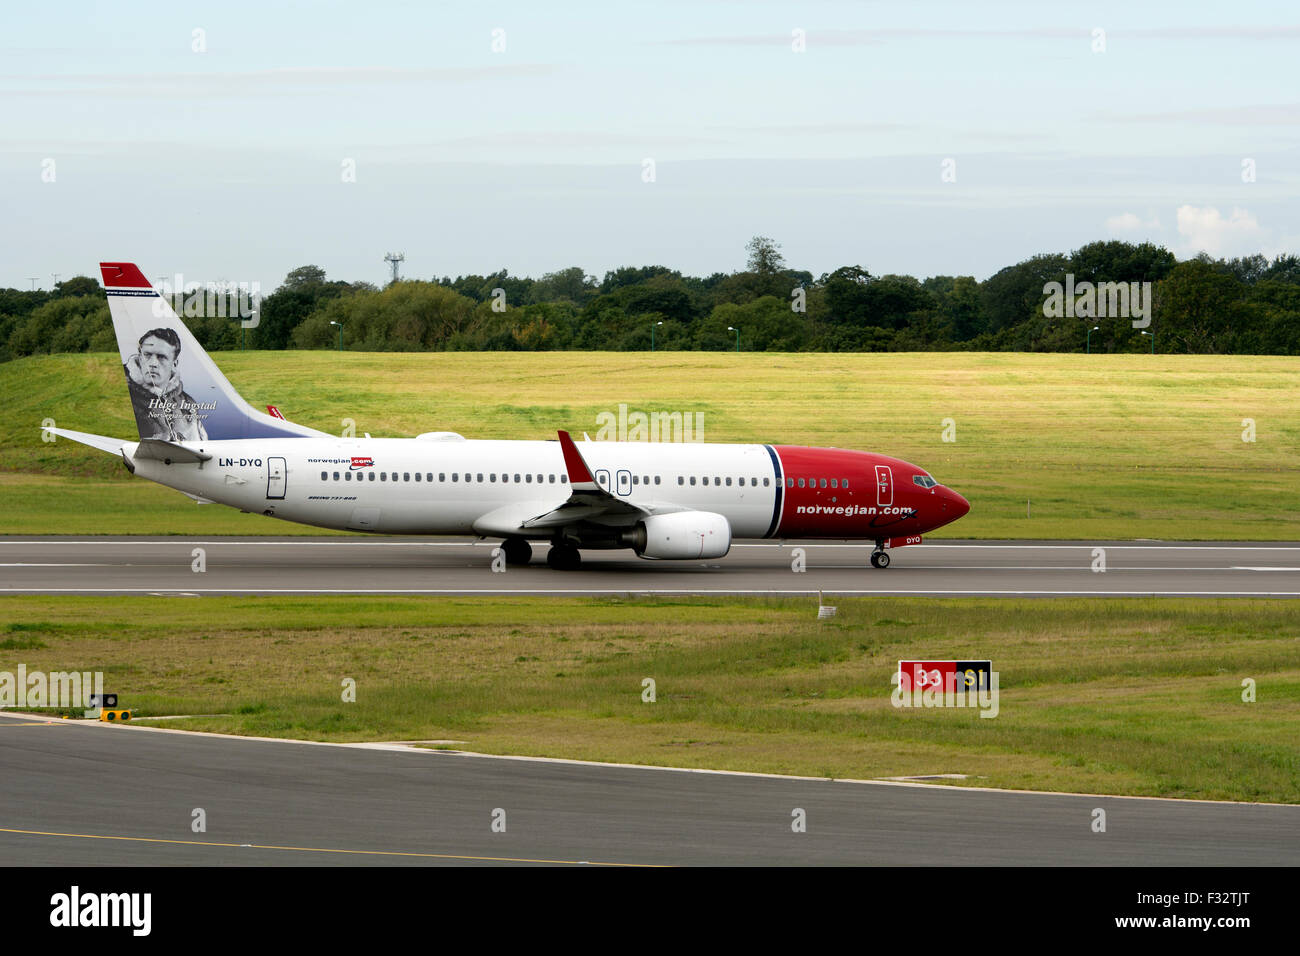 Norwegian Air Shuttle Boeing 737-800 (LN-DYQ) ready for take off at Birmingham Airport, UK Stock Photo